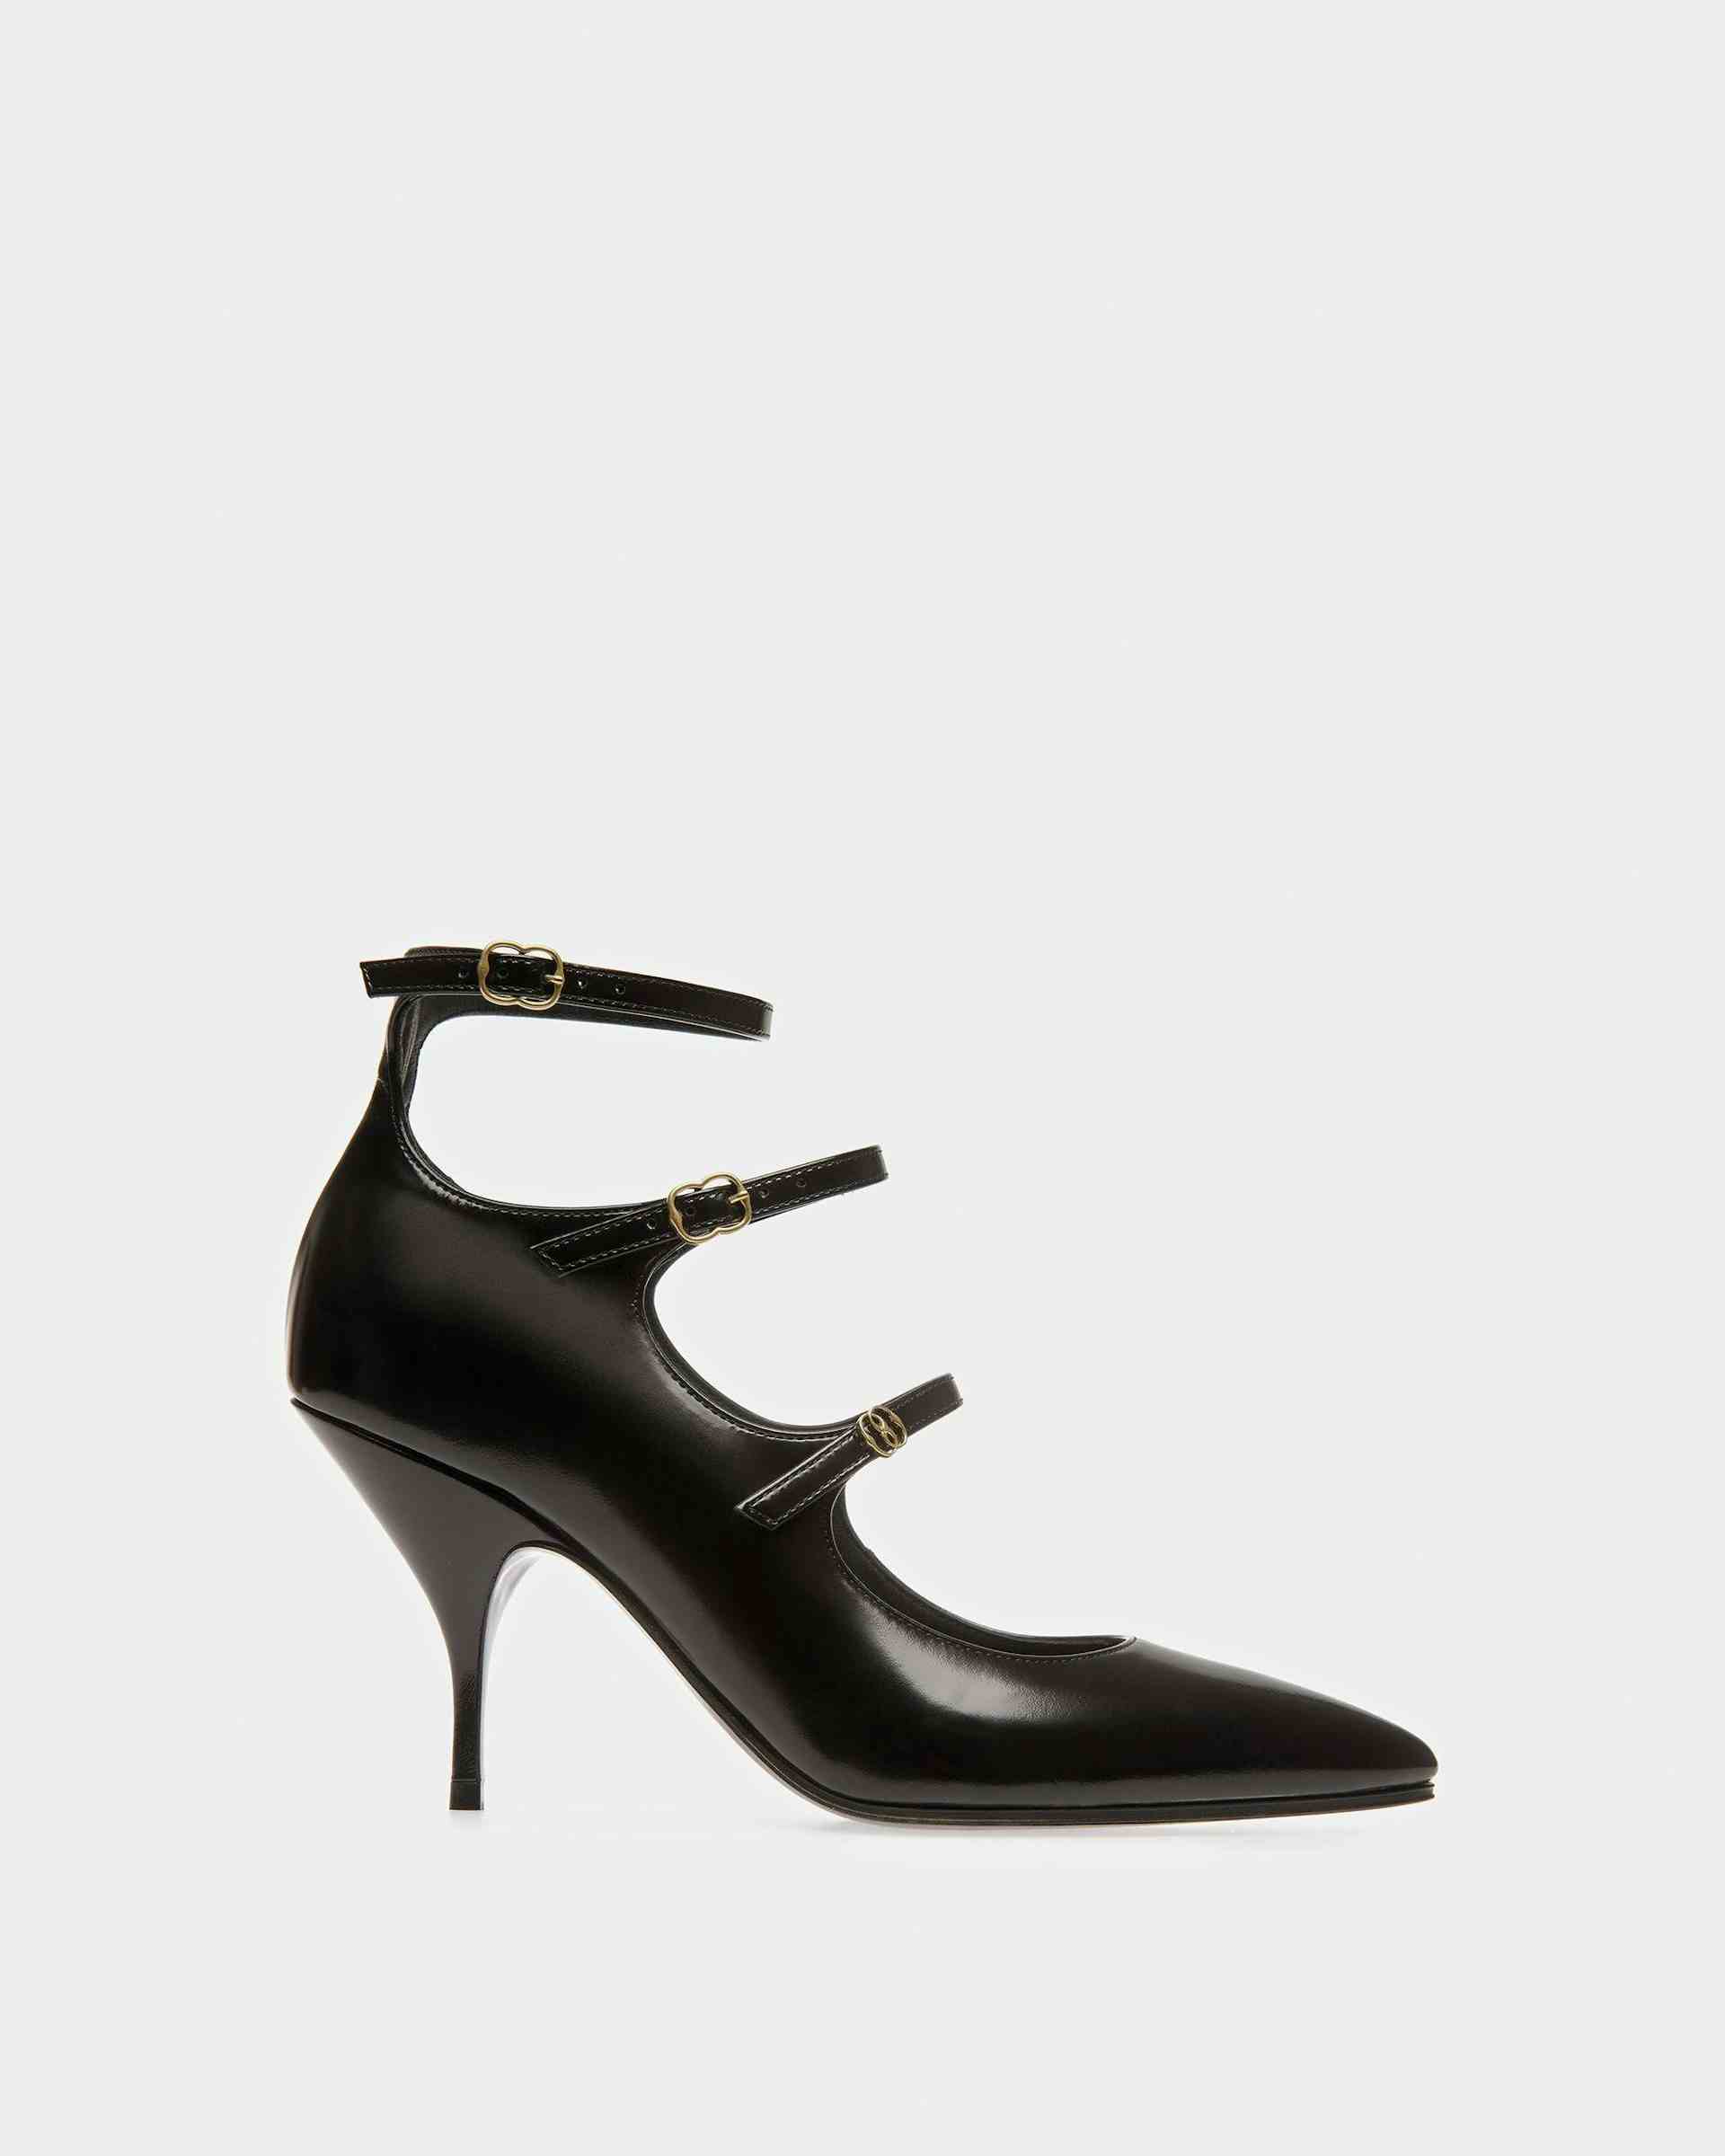 Marilou Pumps In Black Leather - Women's - Bally